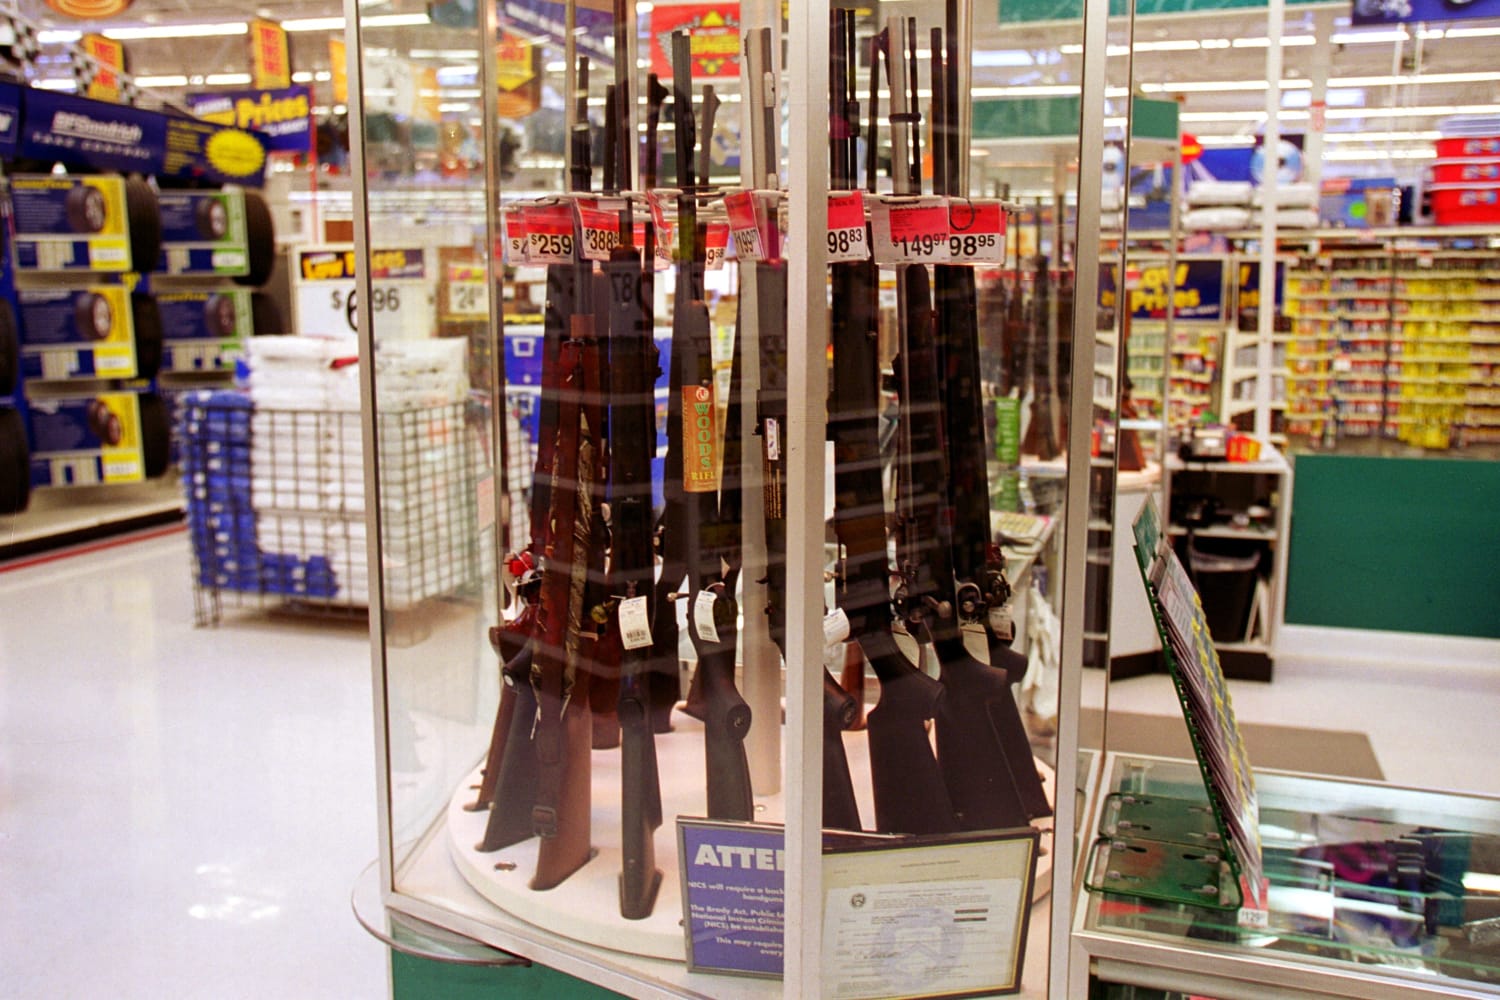 Walmart removes firearms from sales floor in some stores as protests continue across U.S.